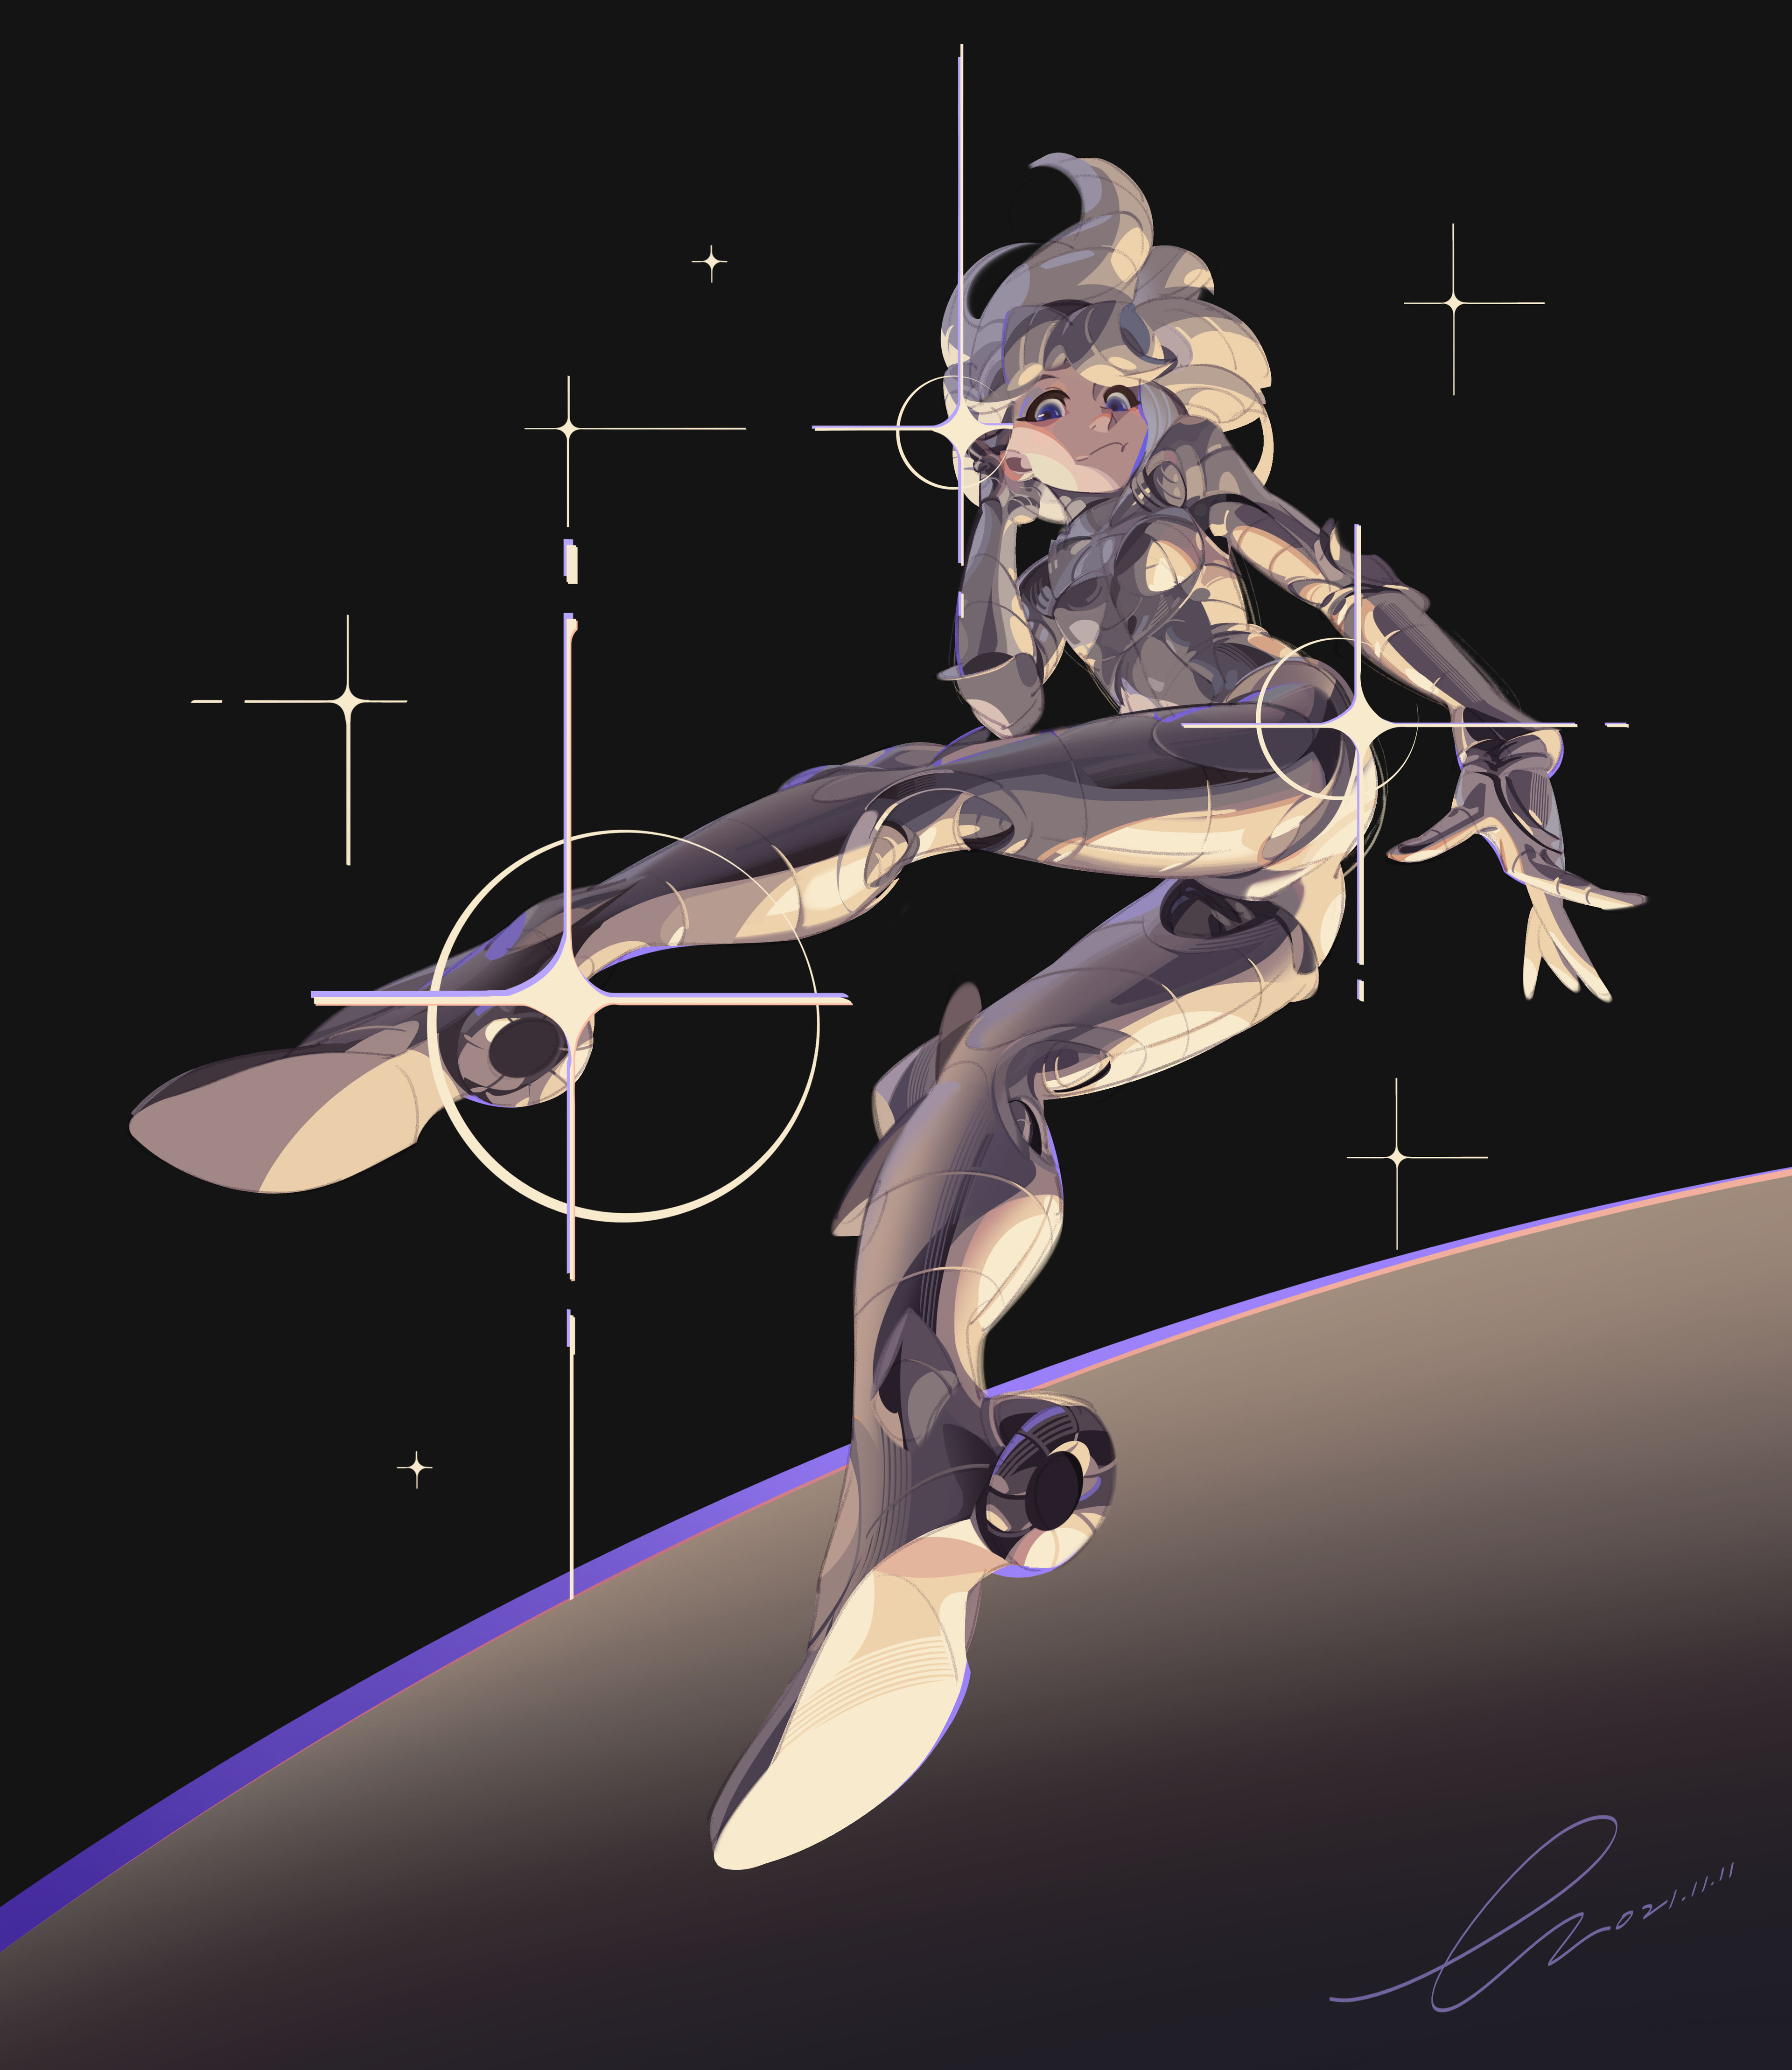 Anime City Anime Girls Space Clouds Stars Anime Girl With Wings Earth Orbit Spacesuit Astronaut 3840x4436